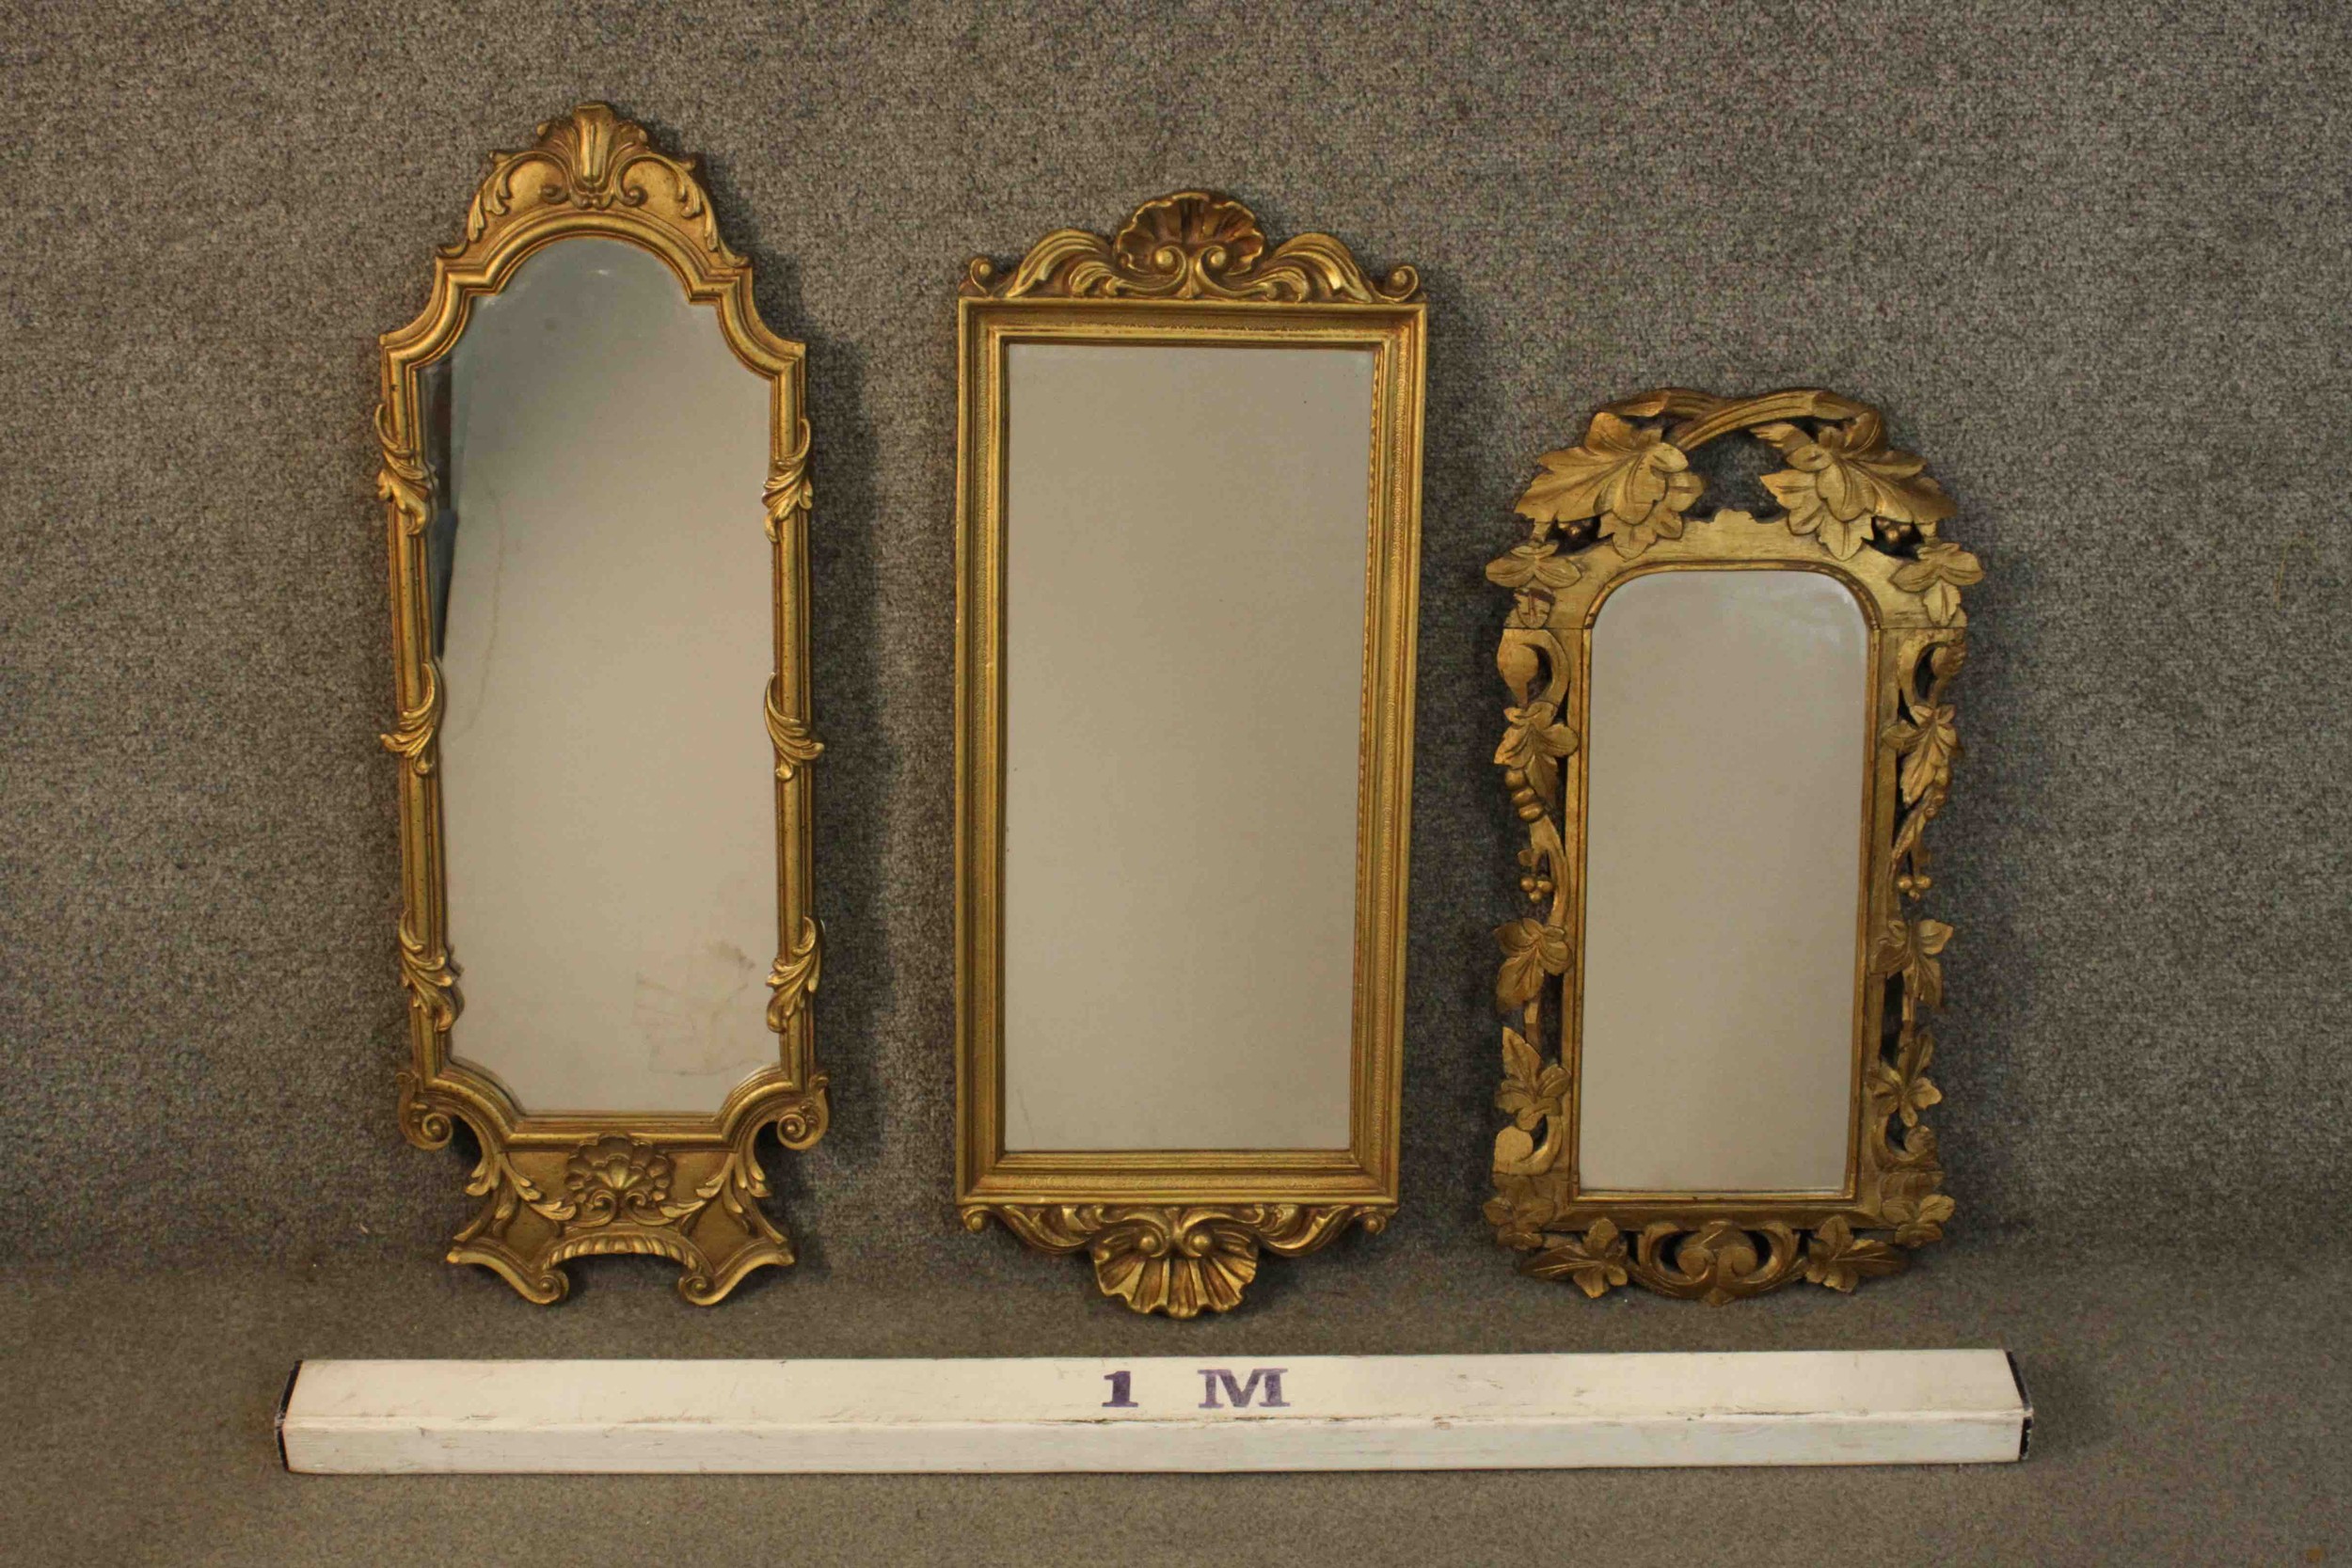 An 18th century carved giltwood framed mirror of small proportions, carved with scrolling vines, - Image 2 of 11